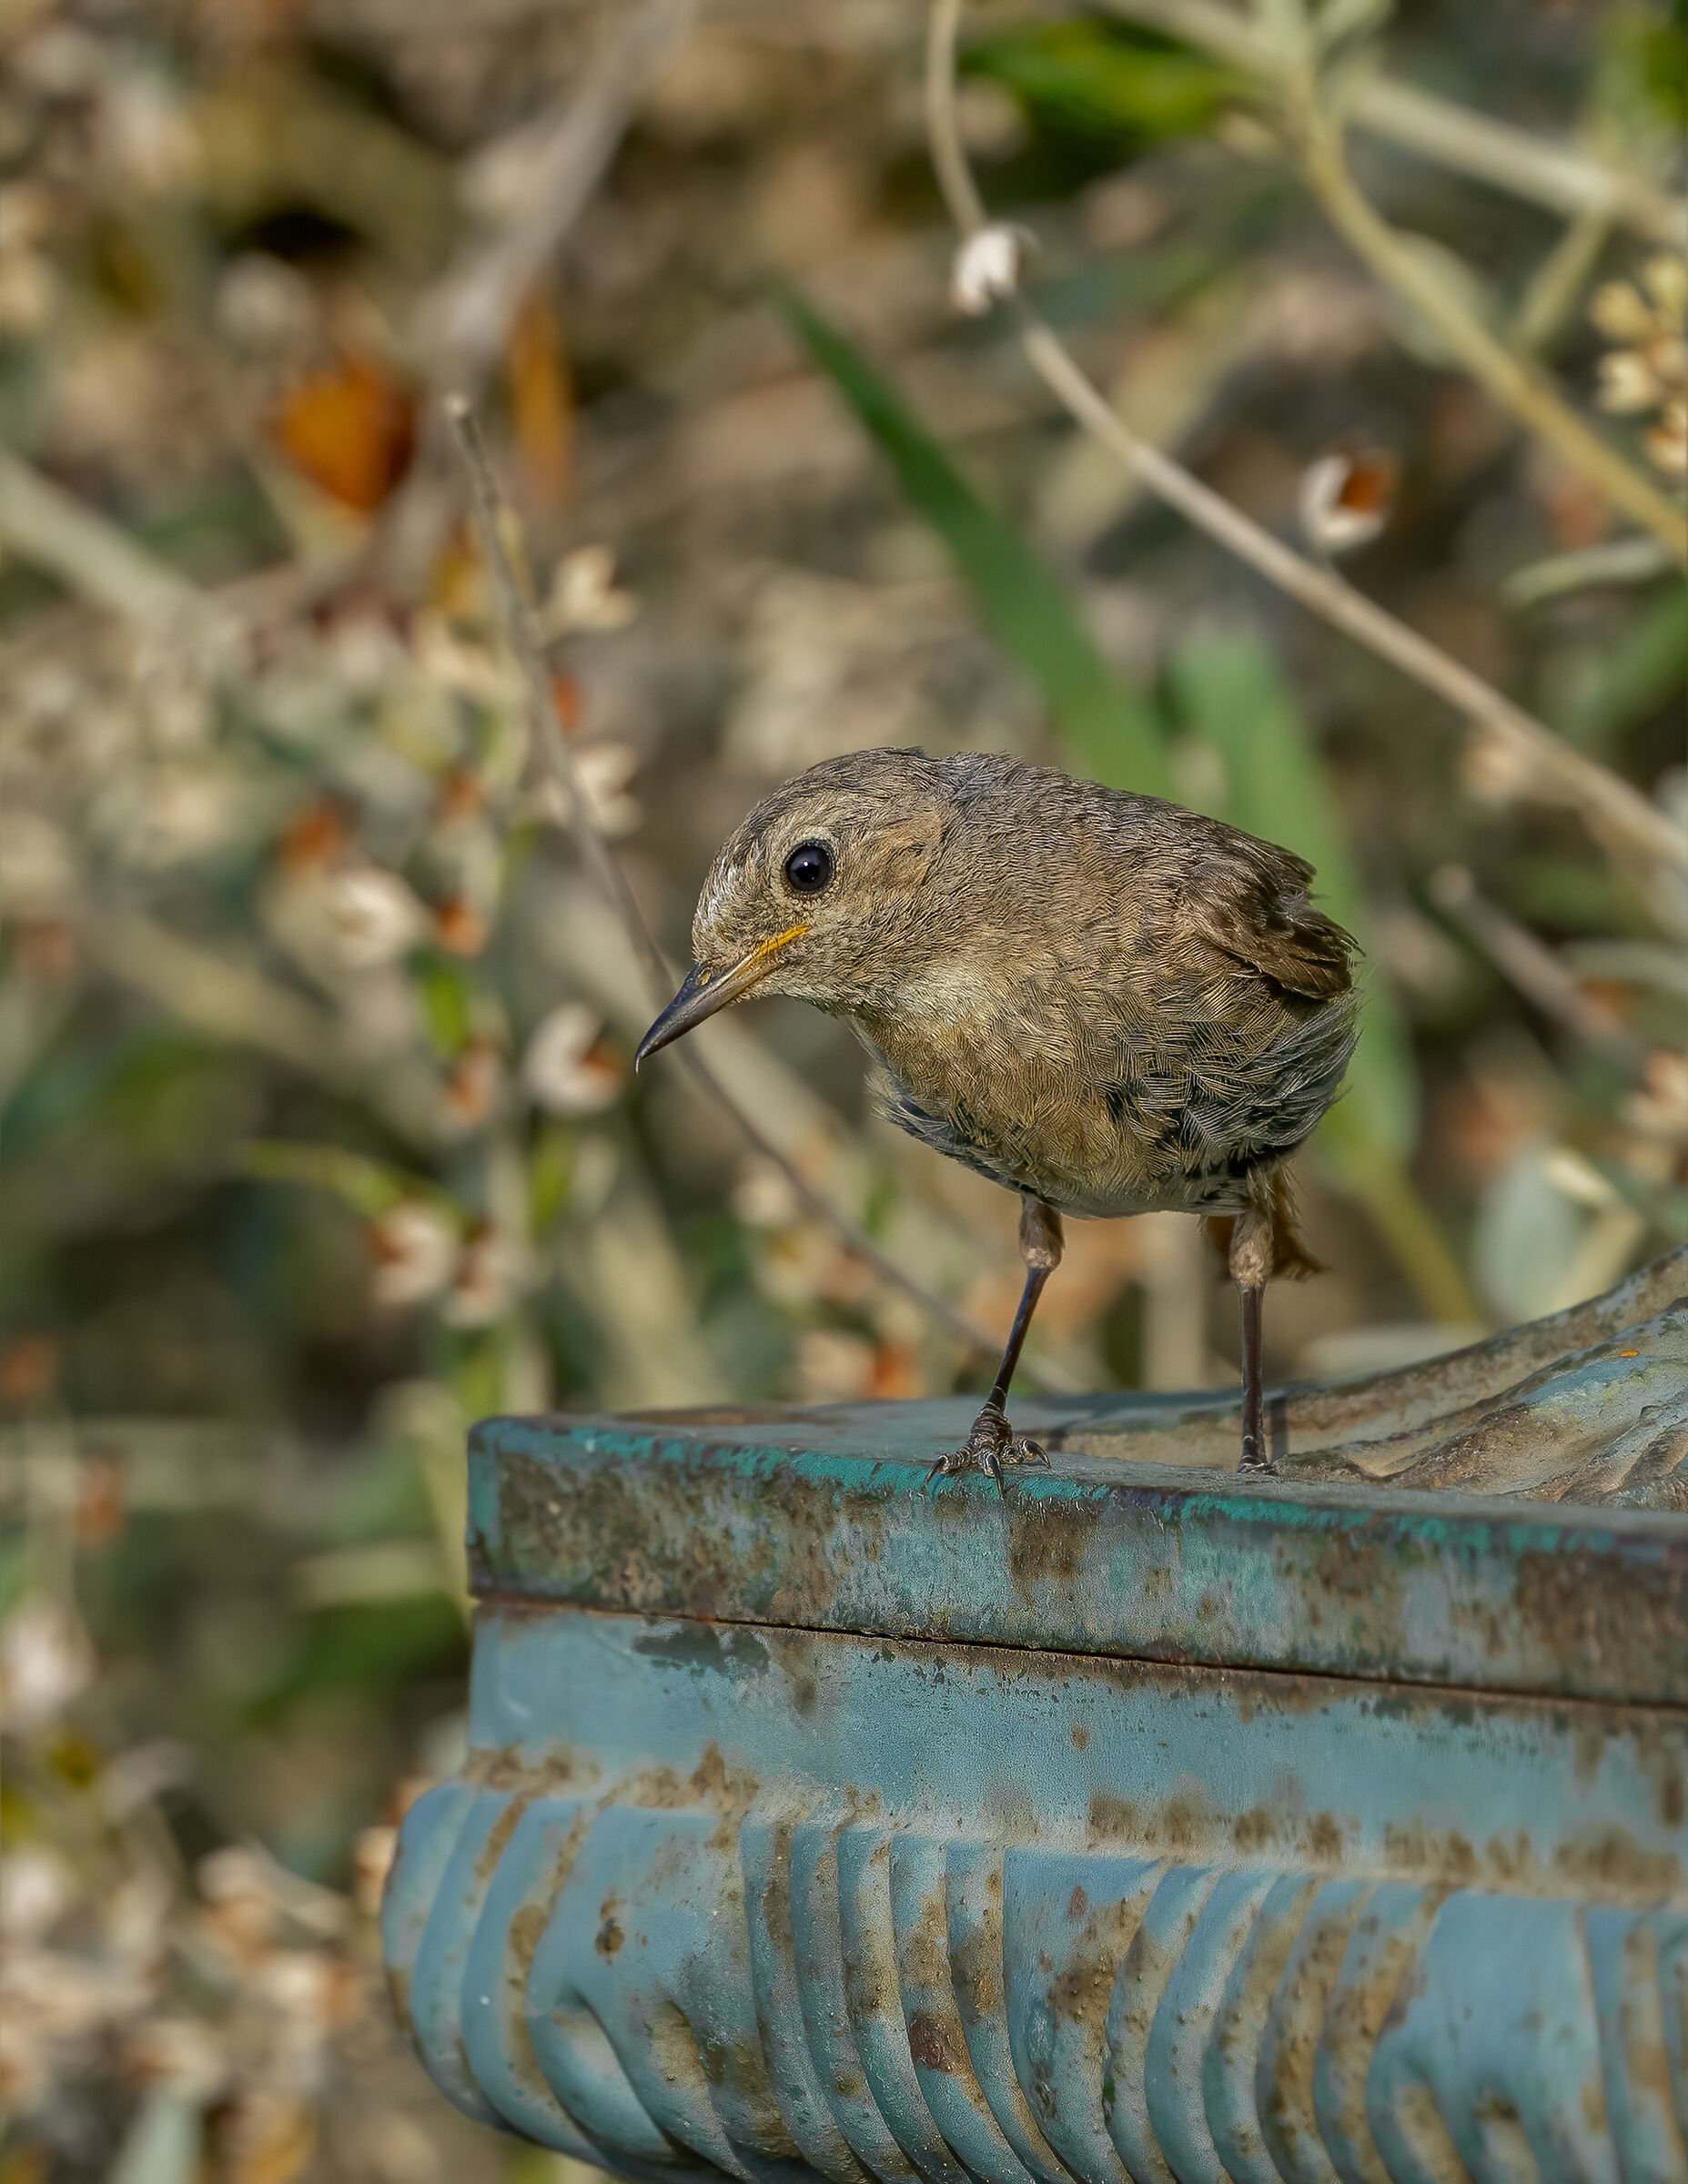 Young Redstart over a drinking fountain ...